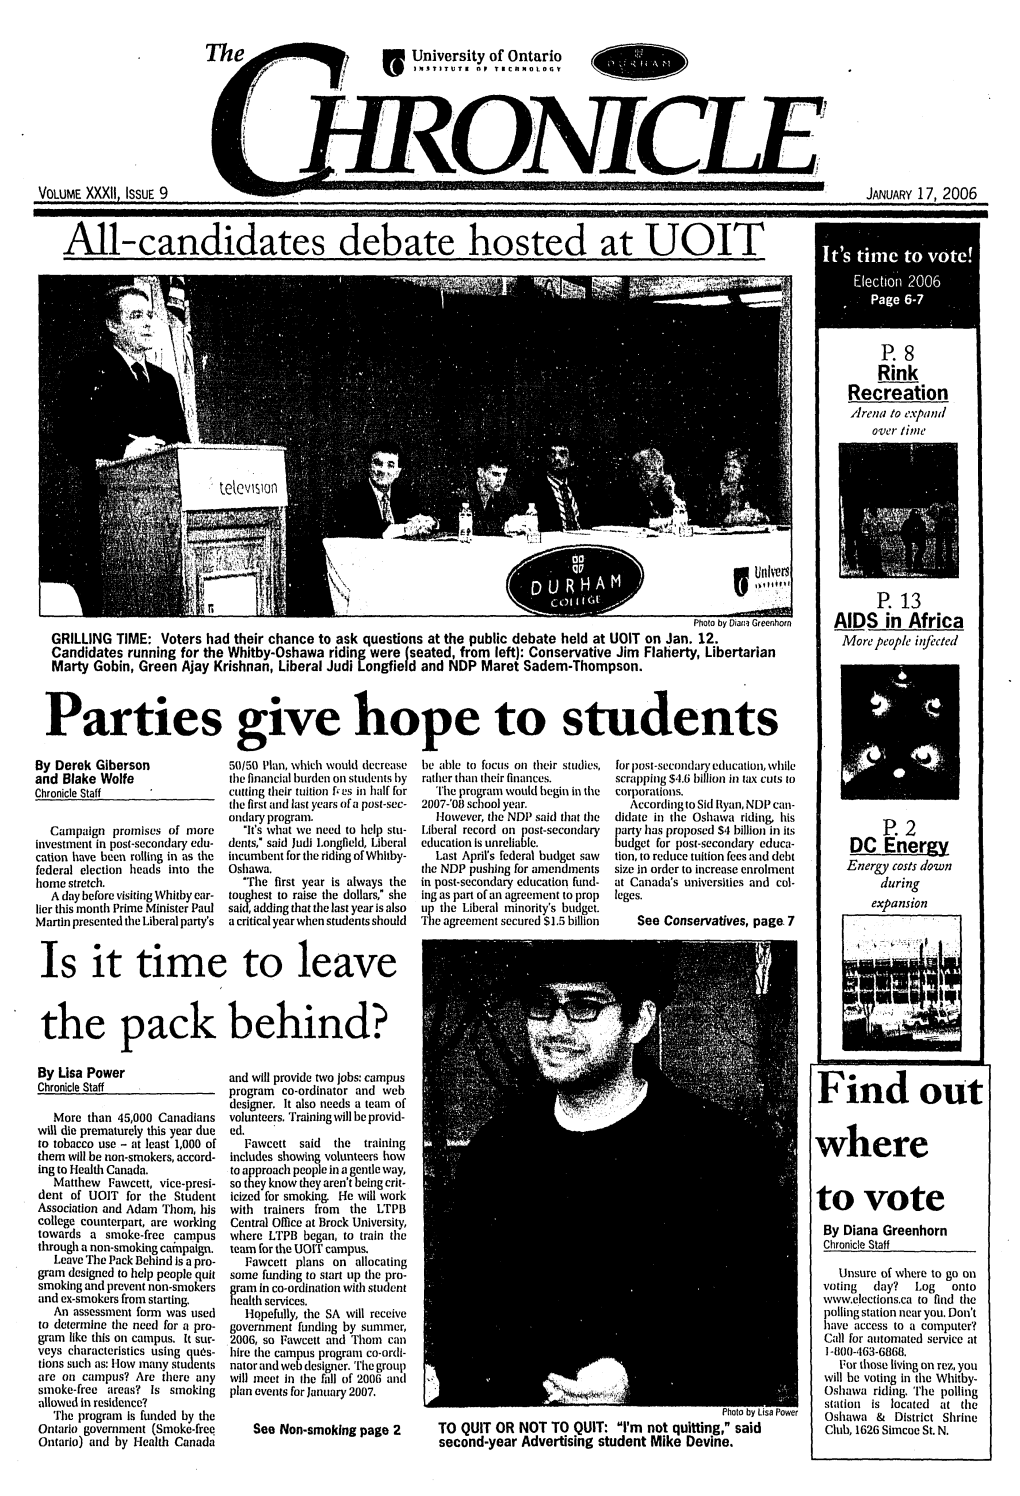 Parties Give Hope to Students